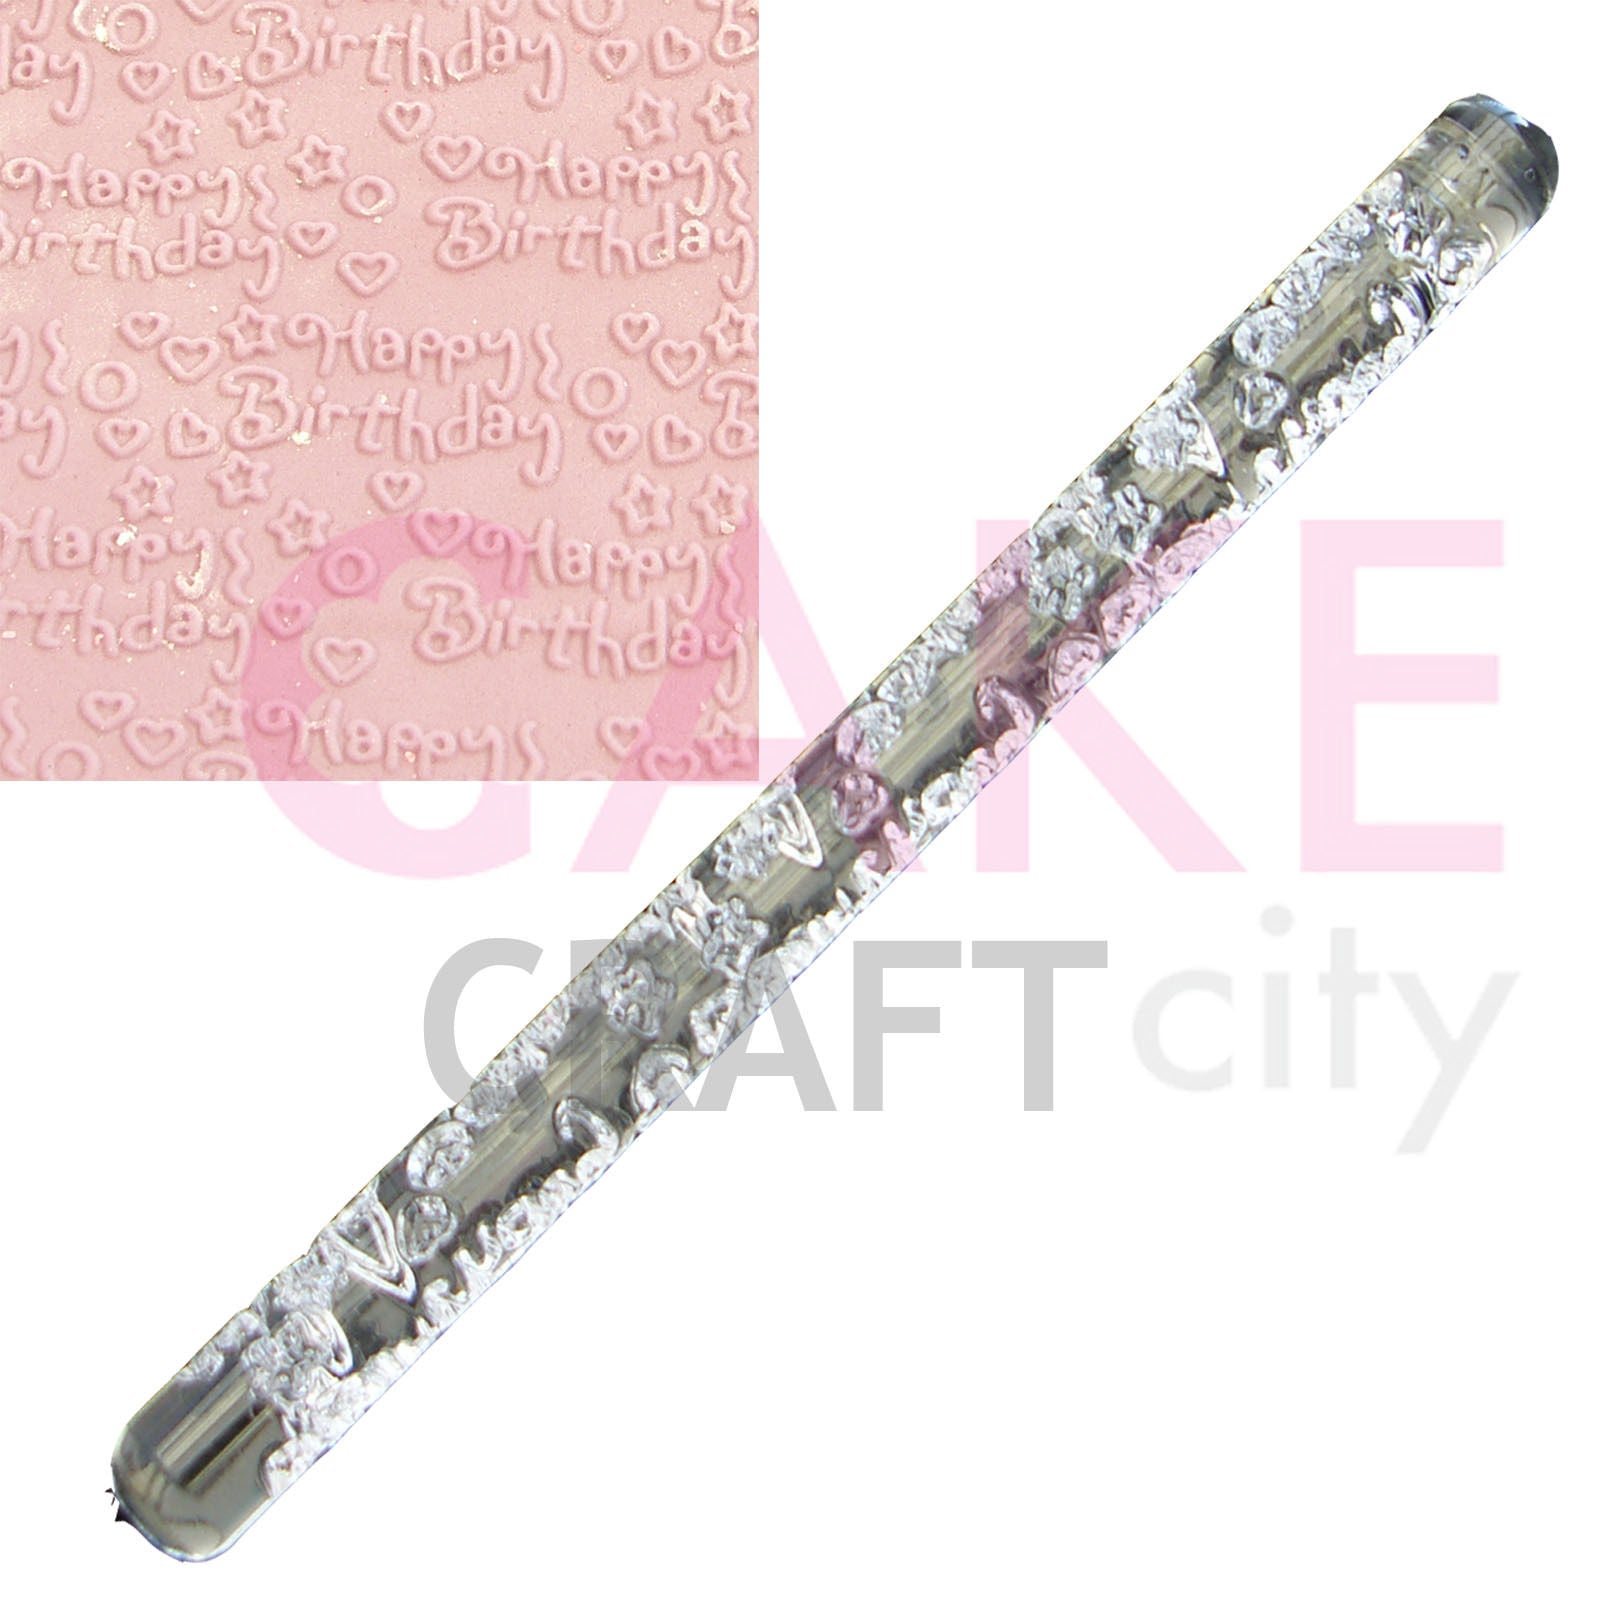 Happy Birthday effect Texture Embossing Acrylic Rolling Pin cake decorating